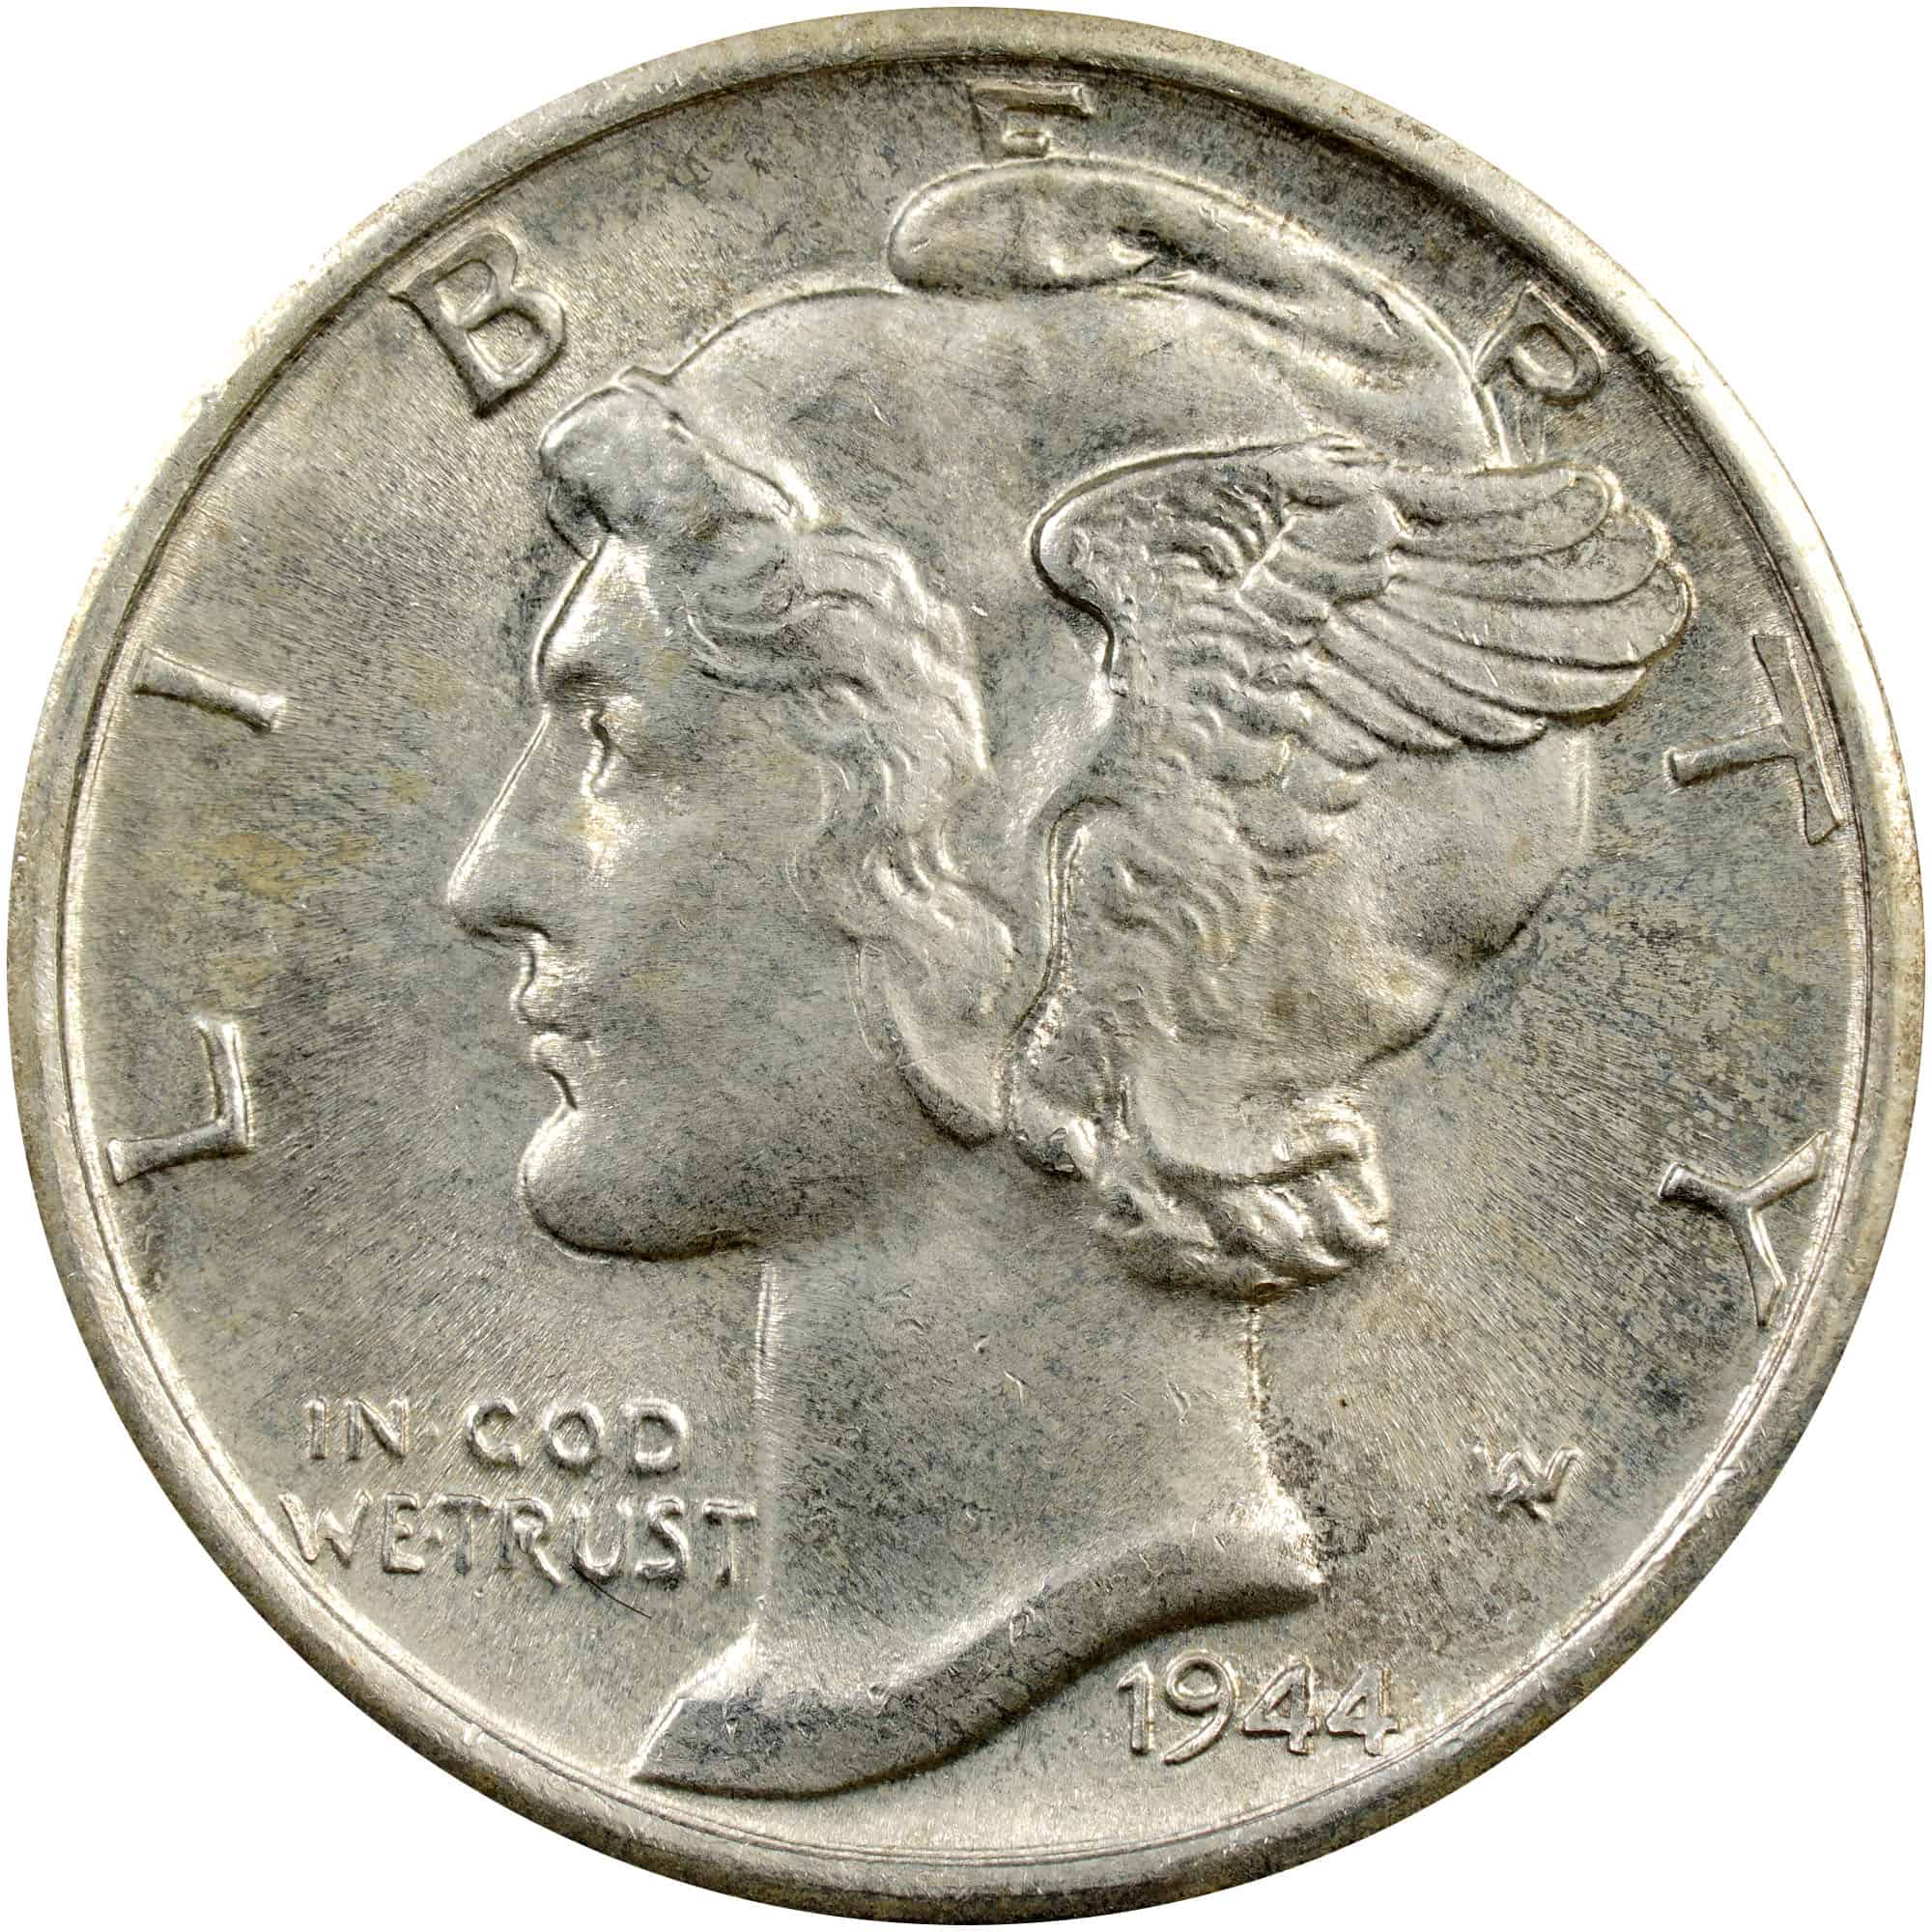 The Obverse of the 1944 Dime